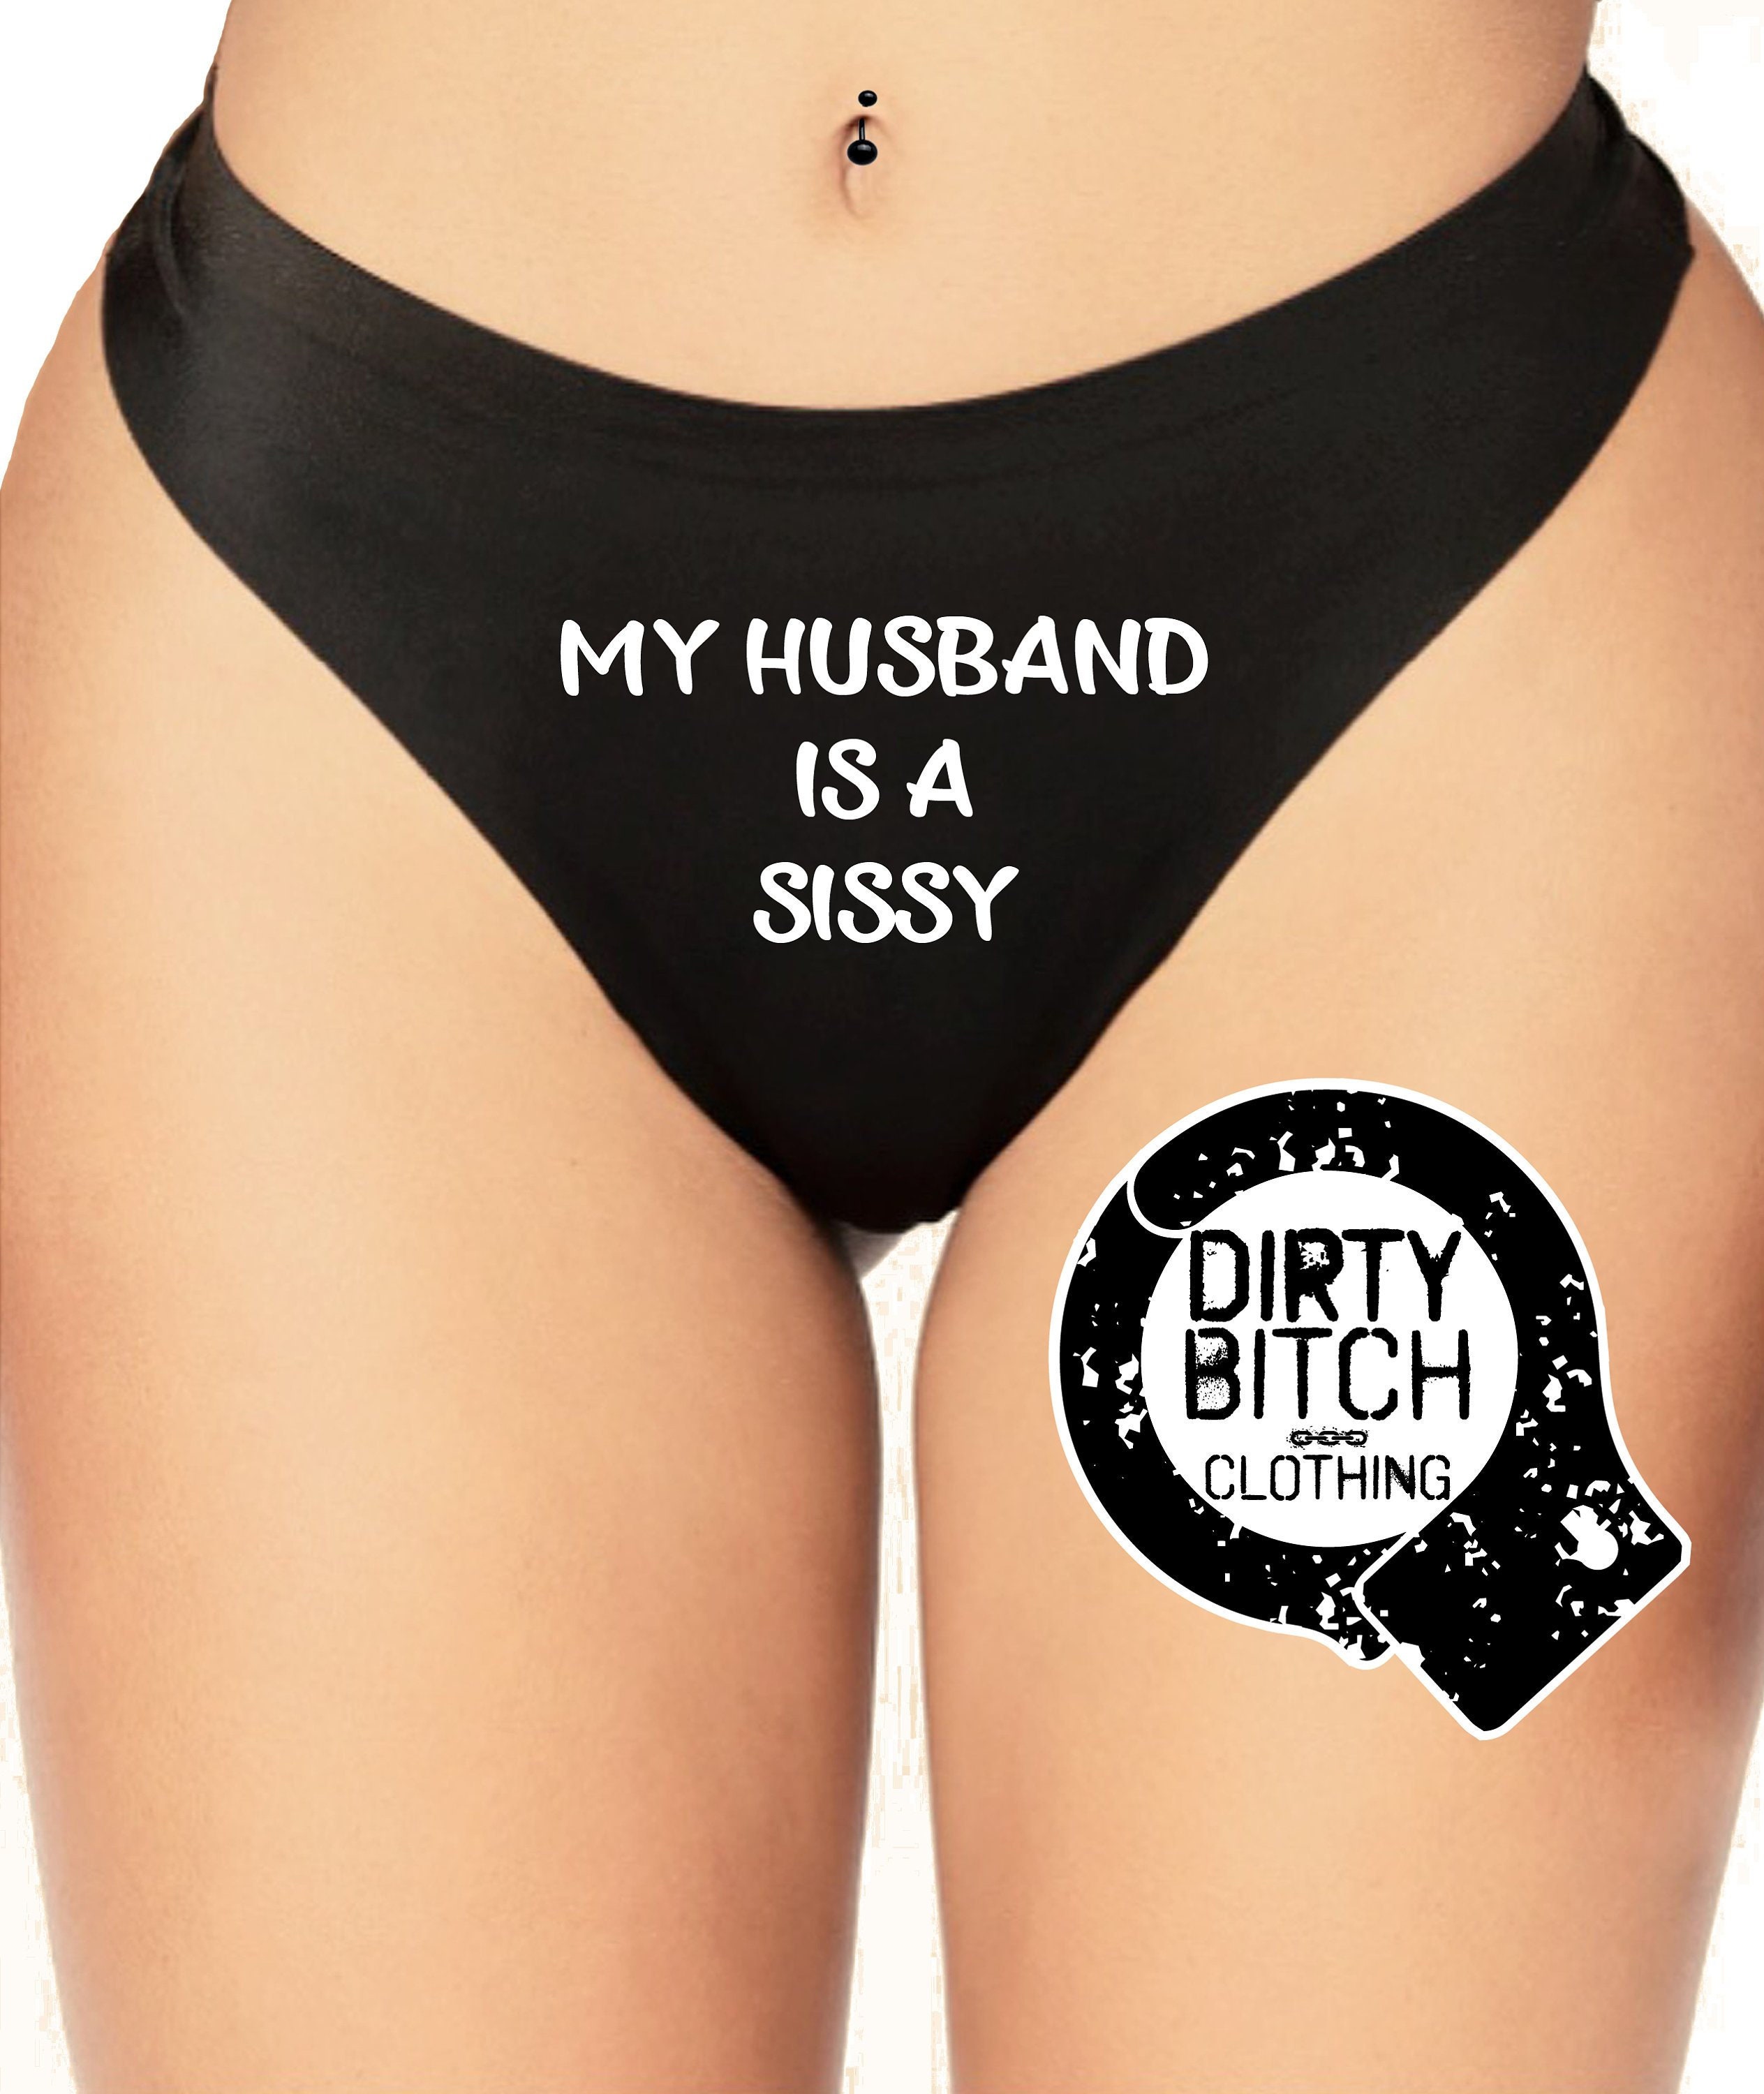 My Husband is A Sissy Adult Knickers Fetish Hotwife